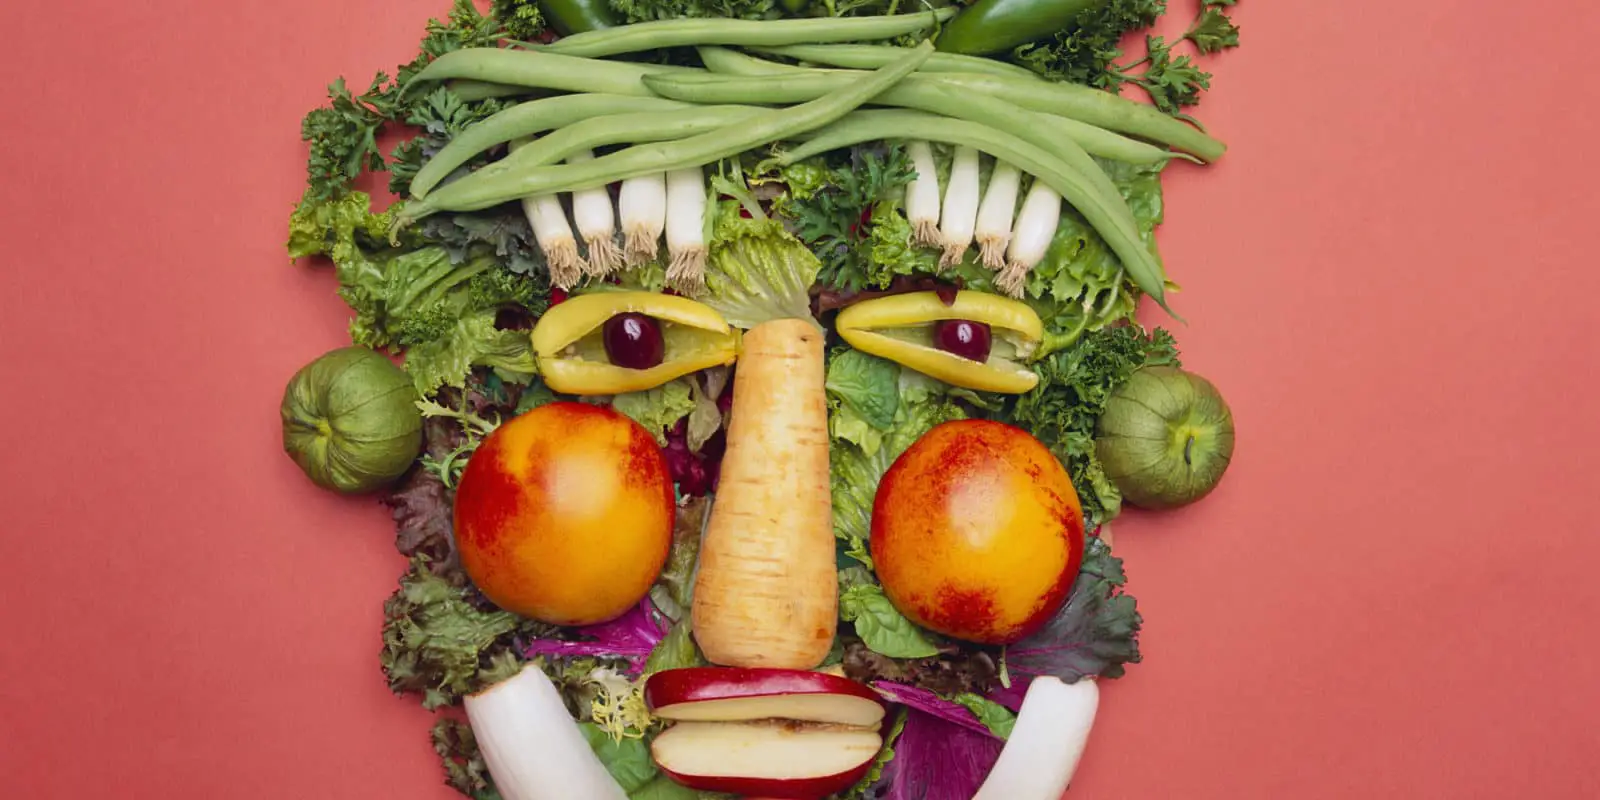 Vegetarian vs. Vegan: What's the Difference